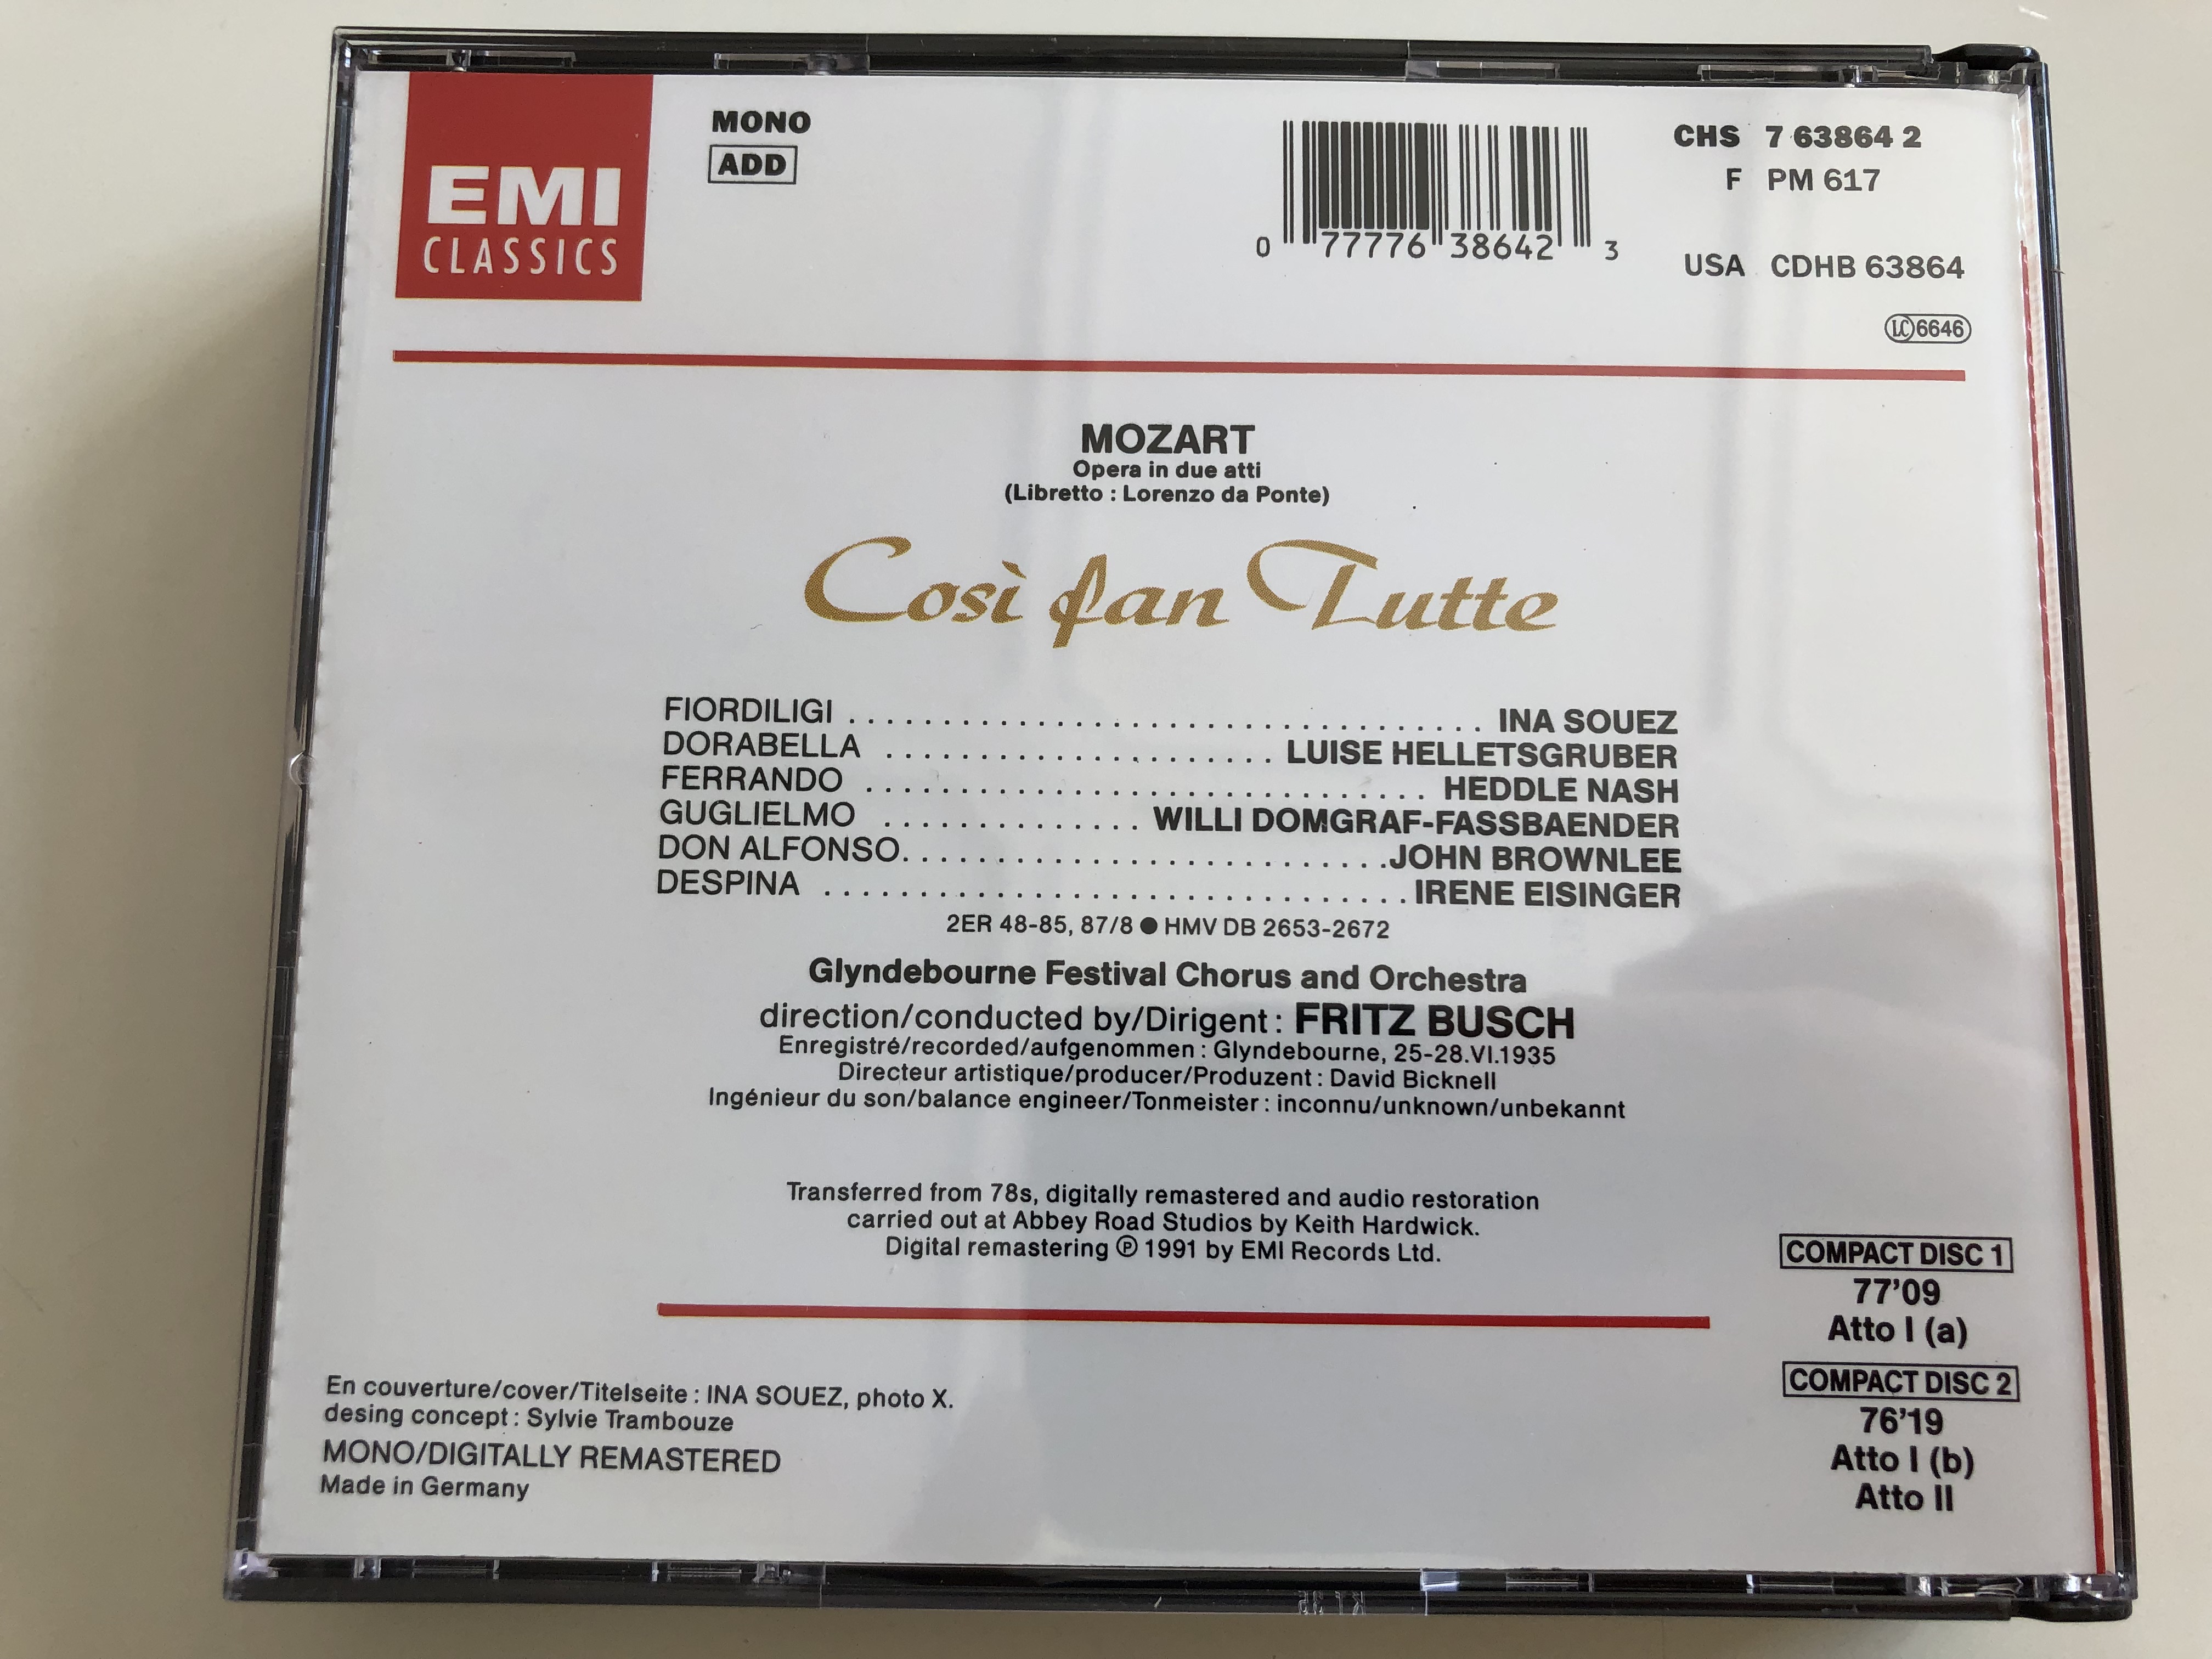 mozart-cosi-fan-tutte-2-cd-na-souez-luise-helletsgruber-irene-eisinger-heddle-nash-glyndebourne-festival-chorus-and-orchestra-conducted-by-fritz-busch-emi-classics-audio-cd-1991-cdhb-63864-4-.jpg